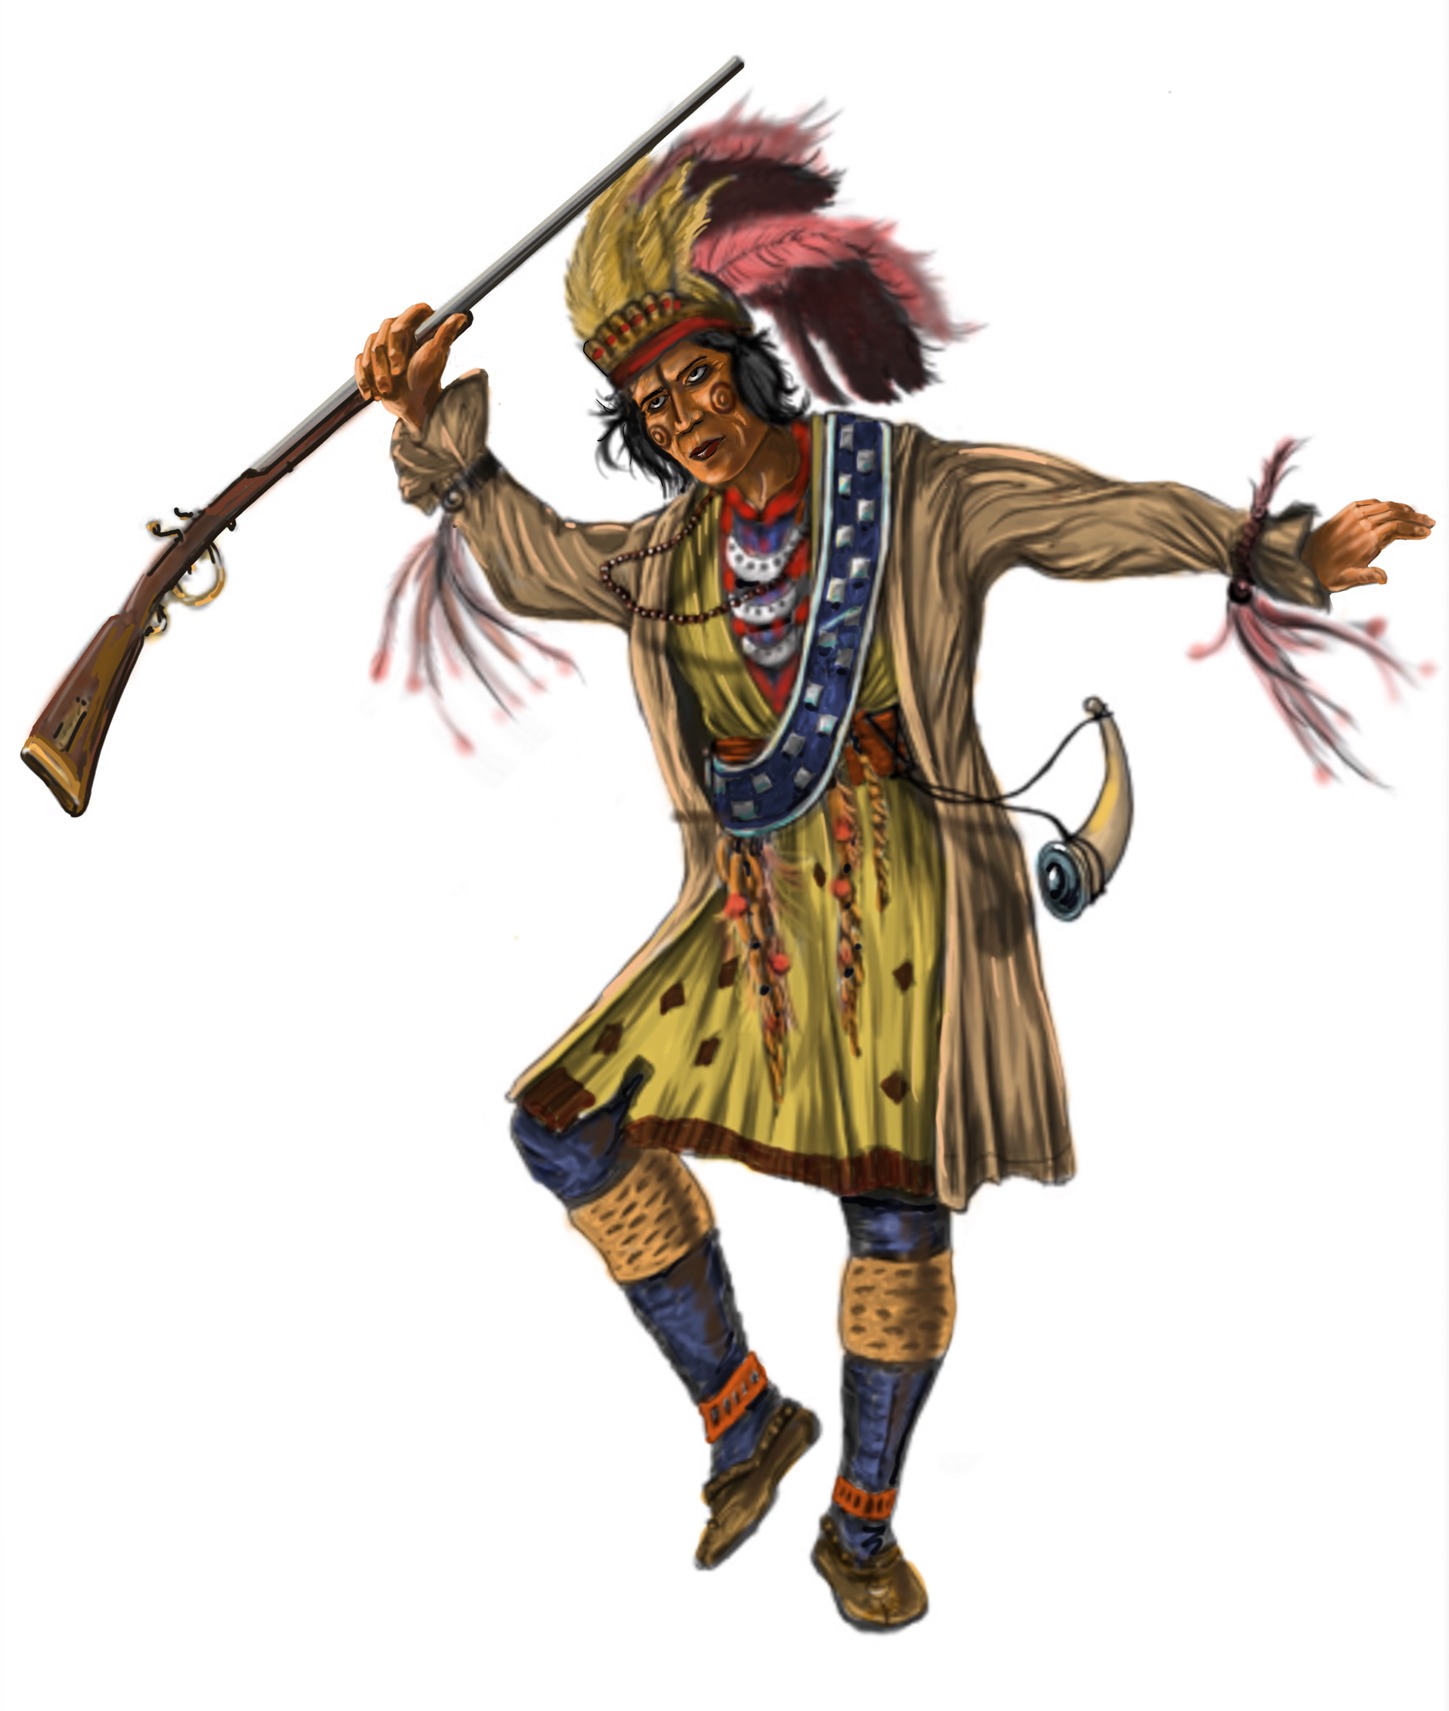 Chief Osceola Illustration from the Speed Of Life by James Victor Jordan